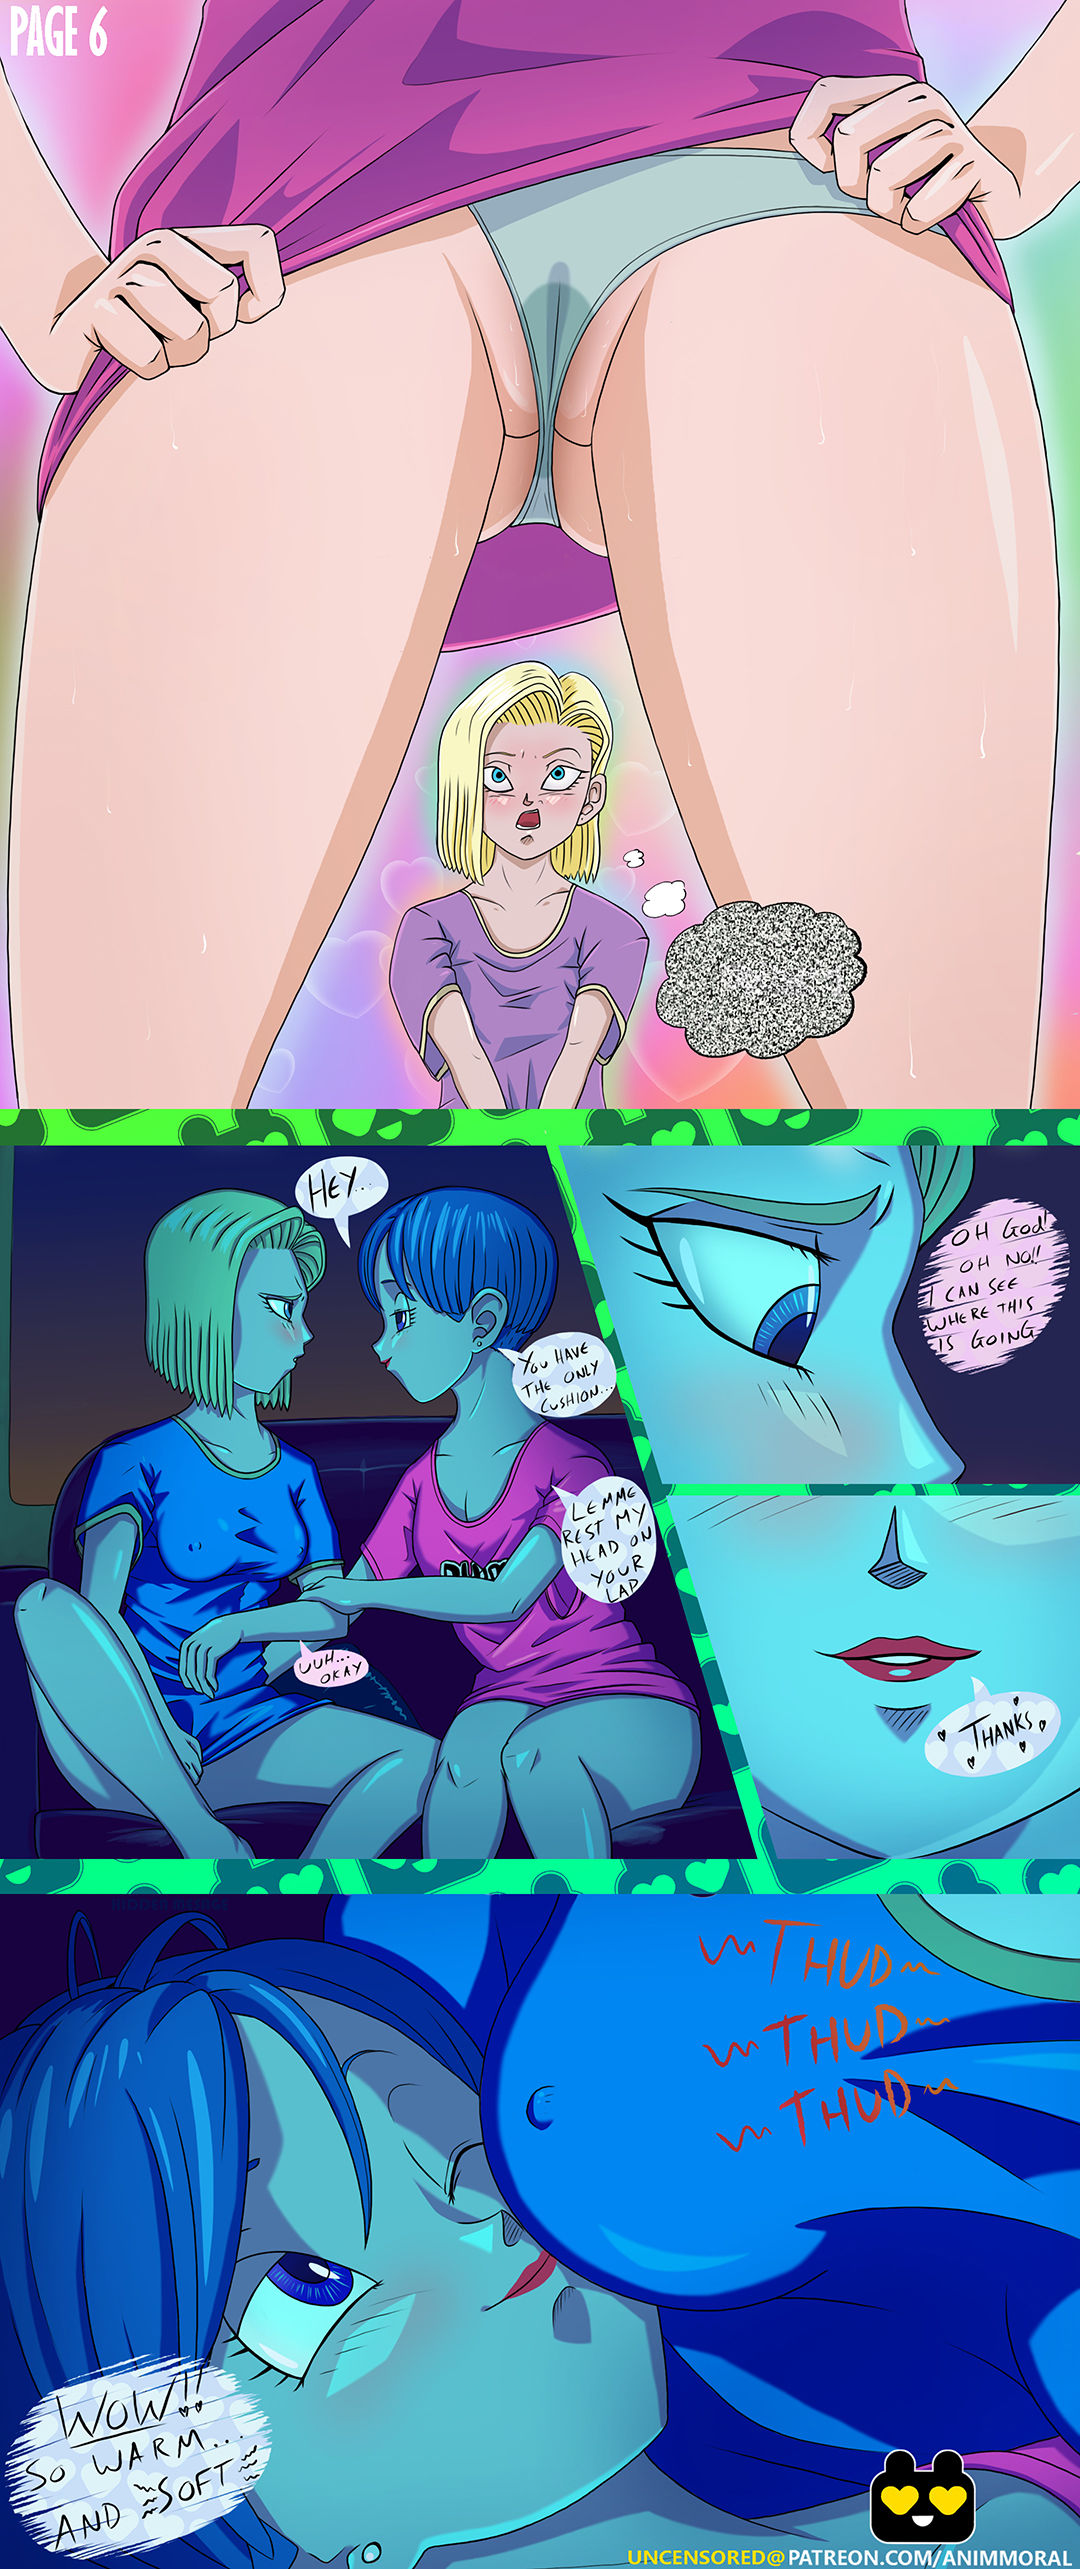 Android 18 And Bulma Hentai - Android 18 + Bulma - Page 7 - HentaiEra